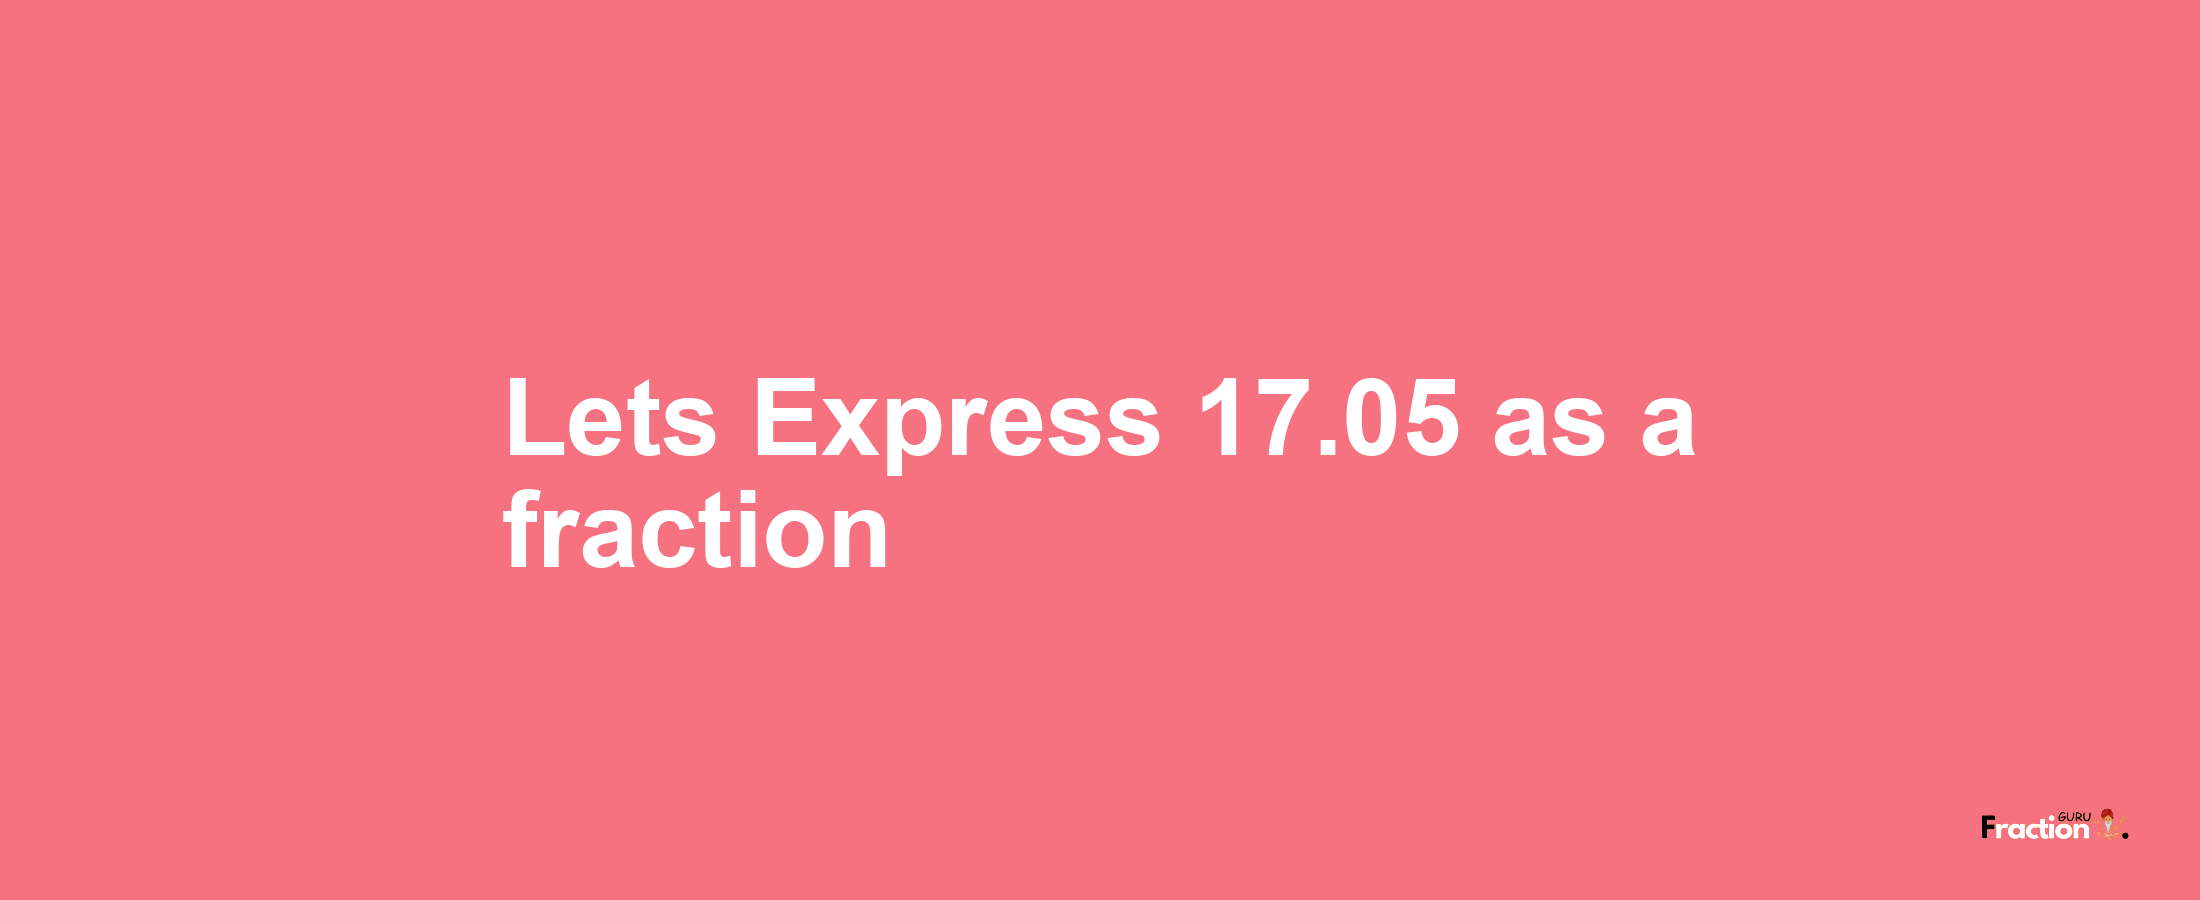 Lets Express 17.05 as afraction